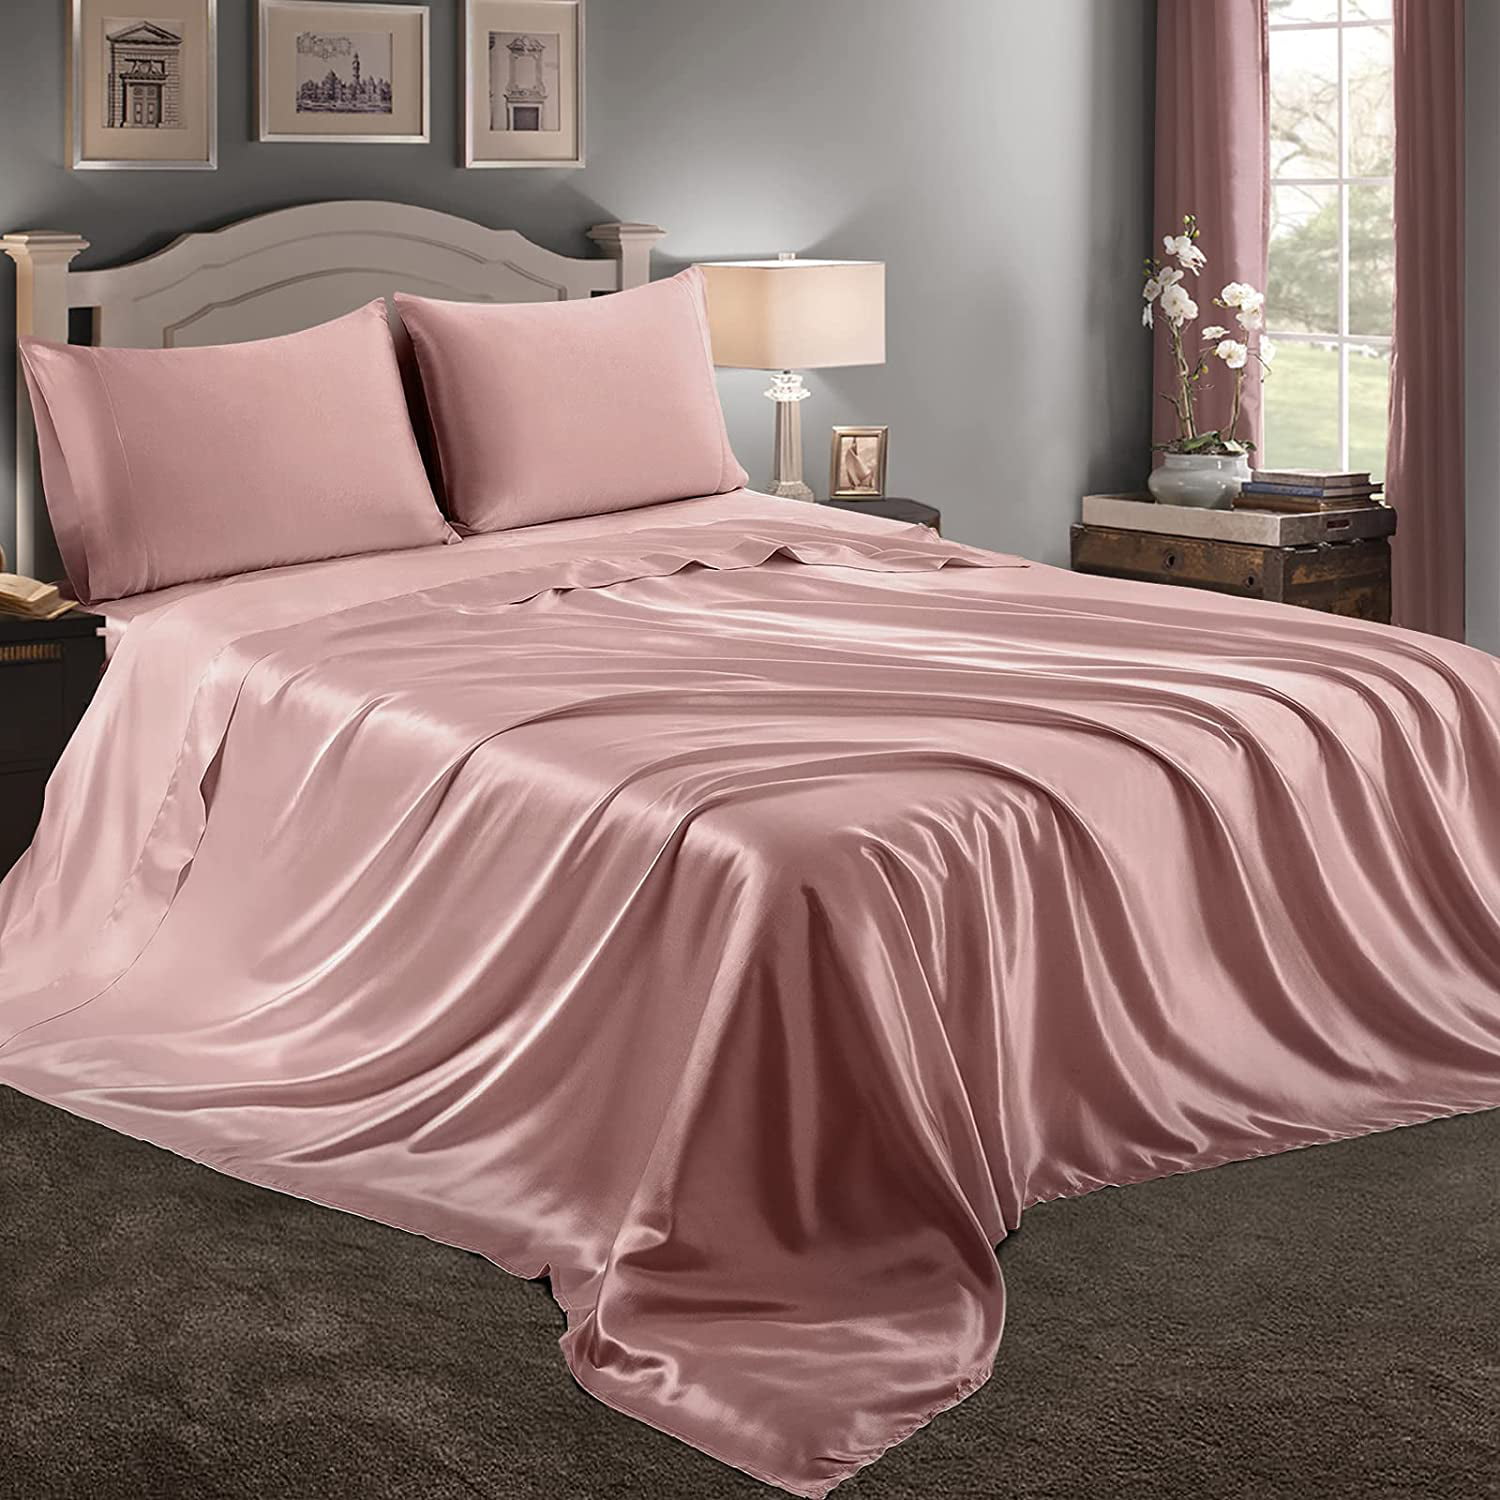 Cooling Silk Sheets